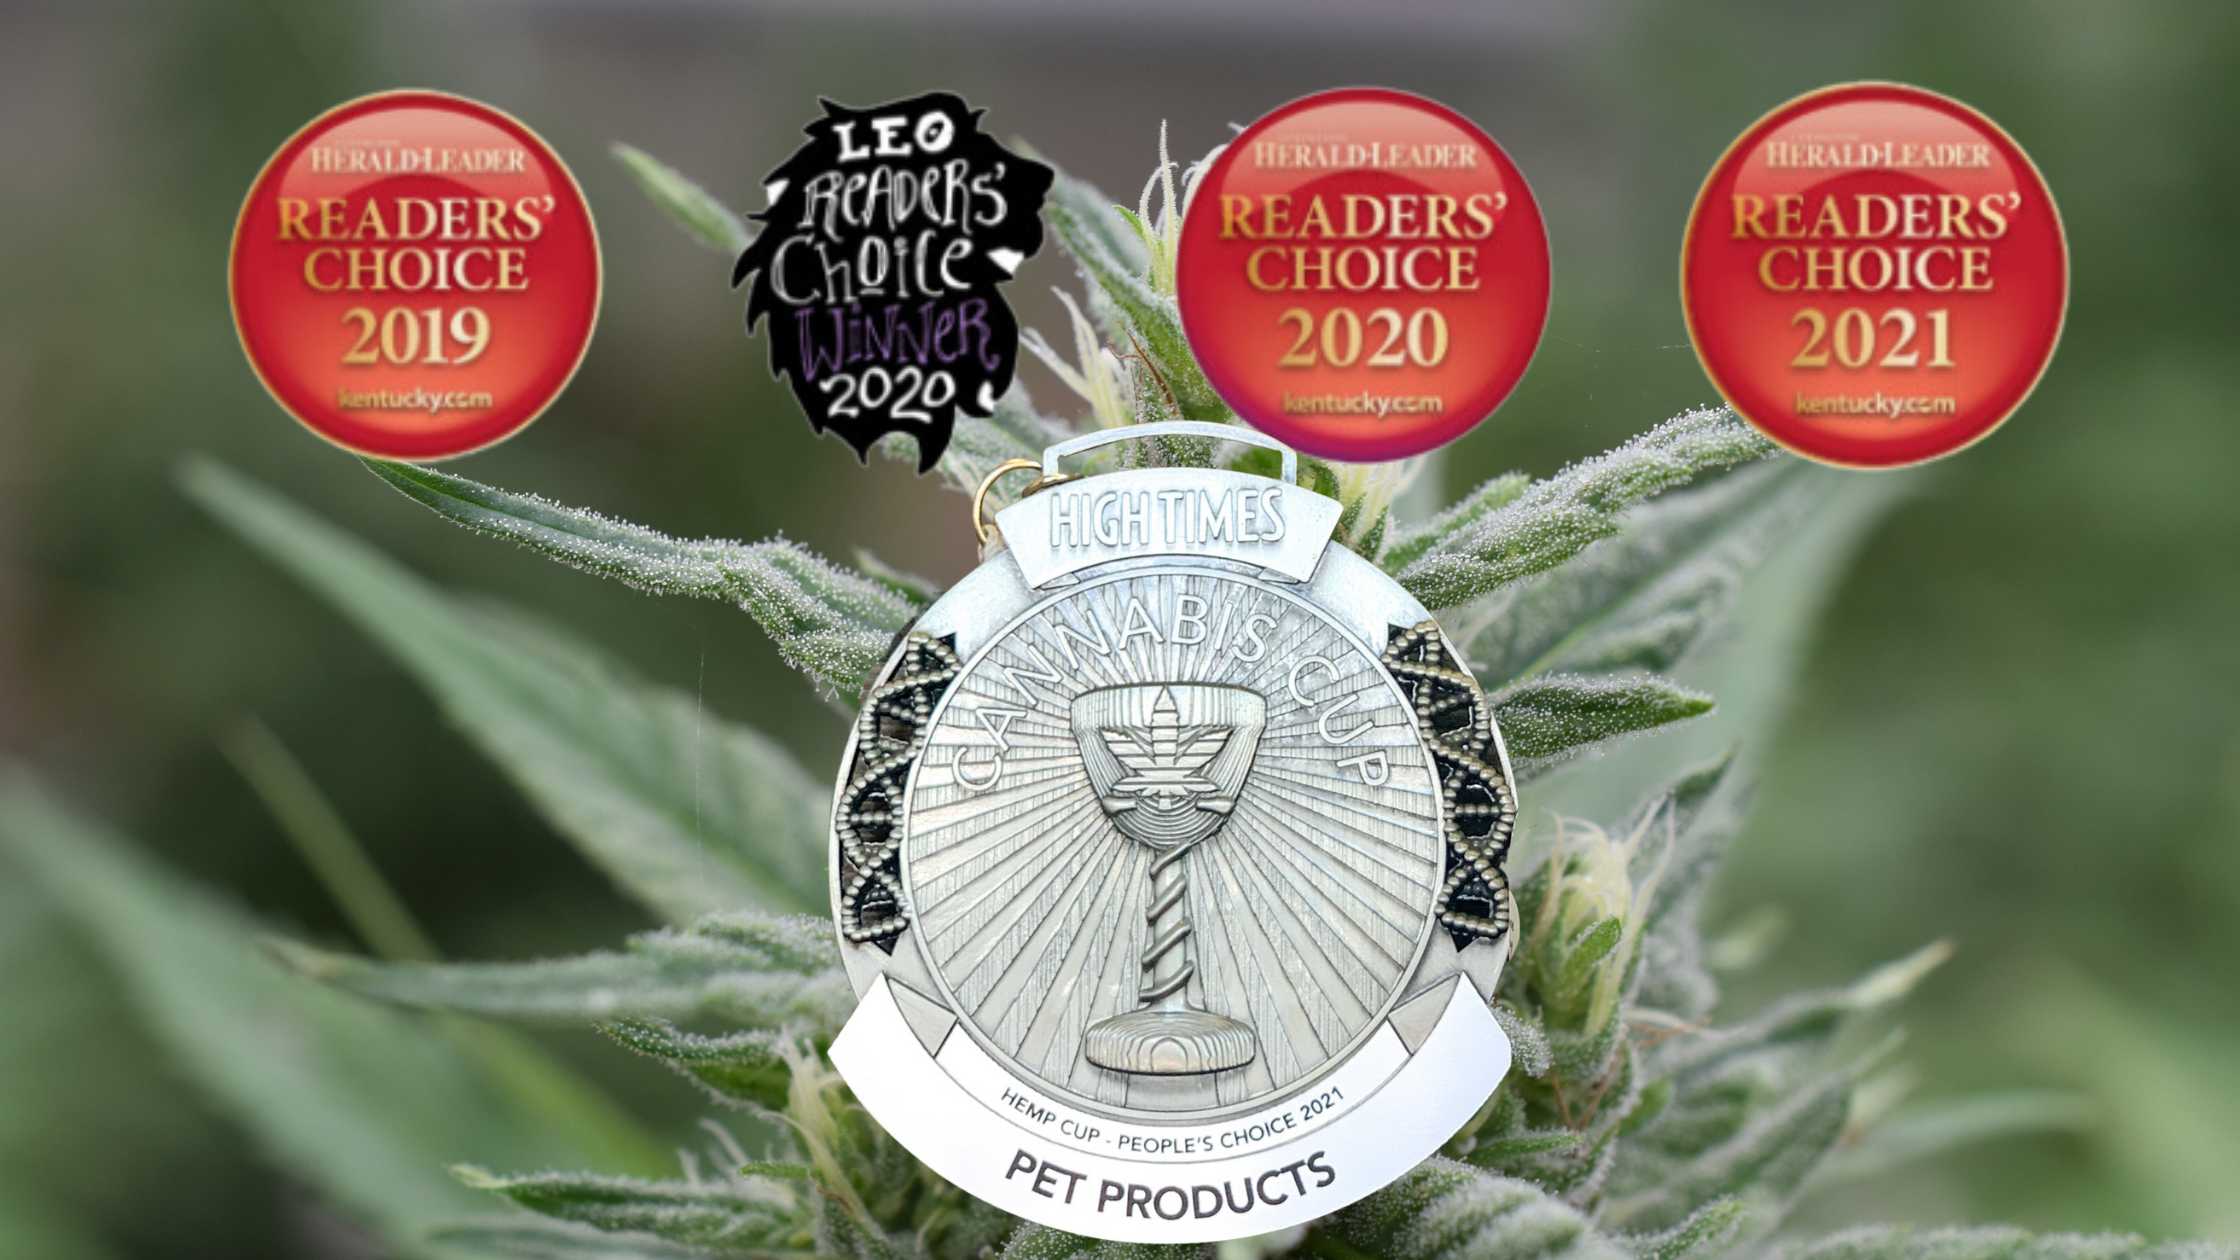 A collection of awards showcased, won by Bluegrass Hemp Oil for Kentucky Cannabis Company products.